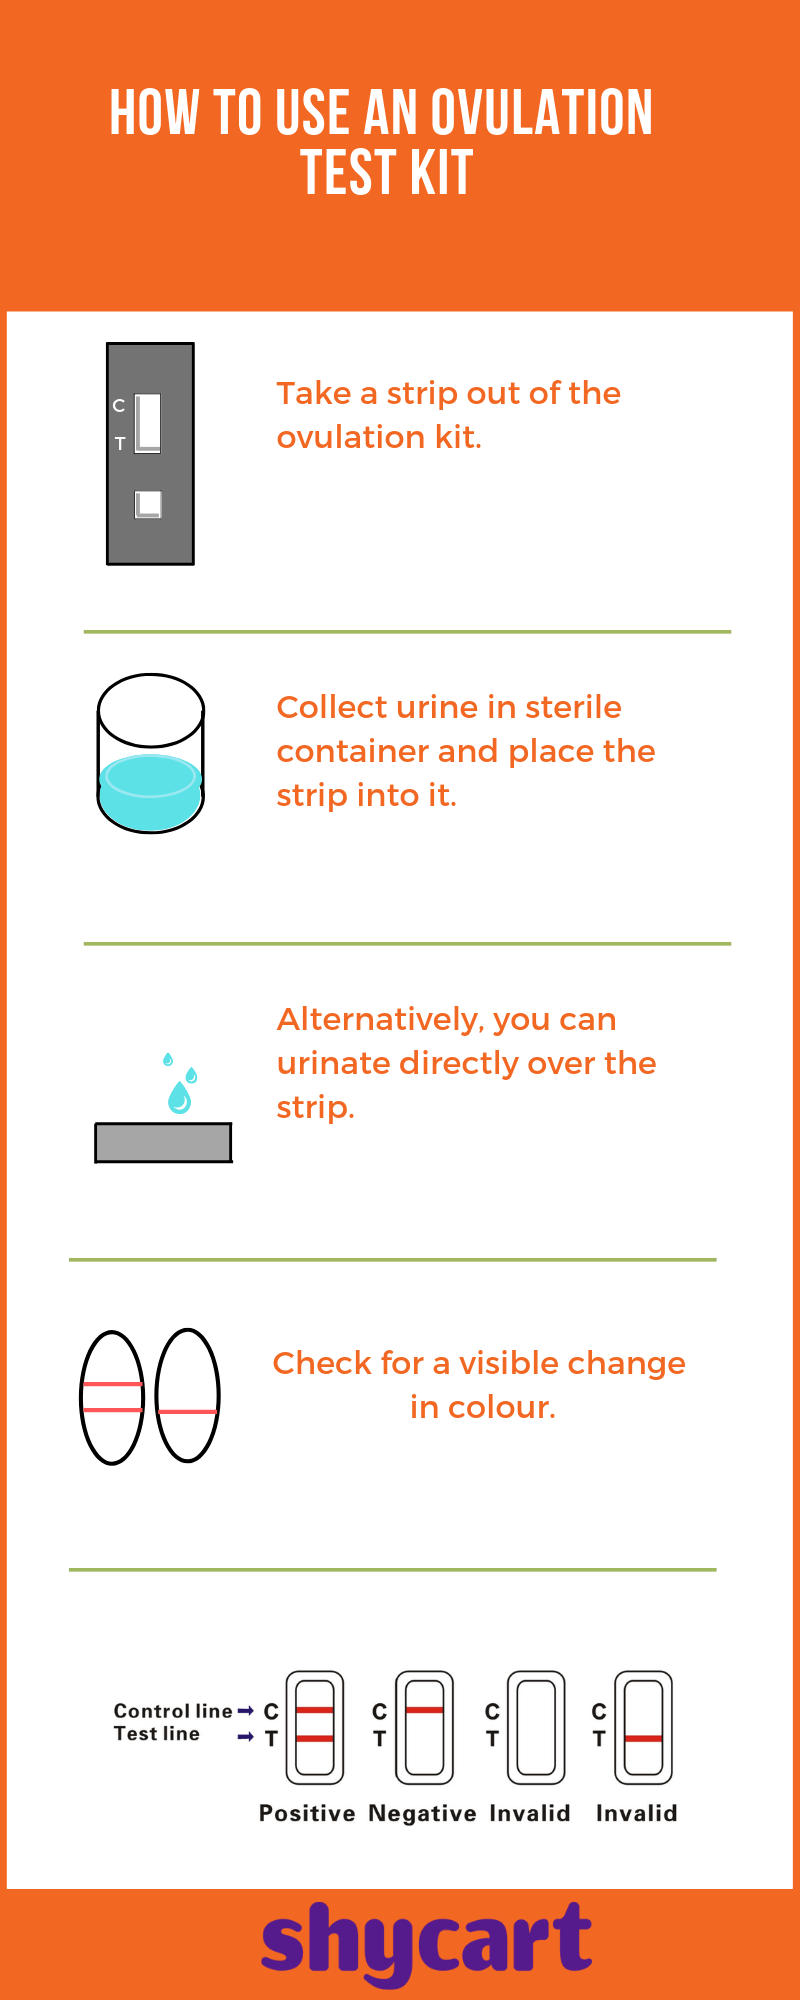 How to use an ovulation test kit - Infographic